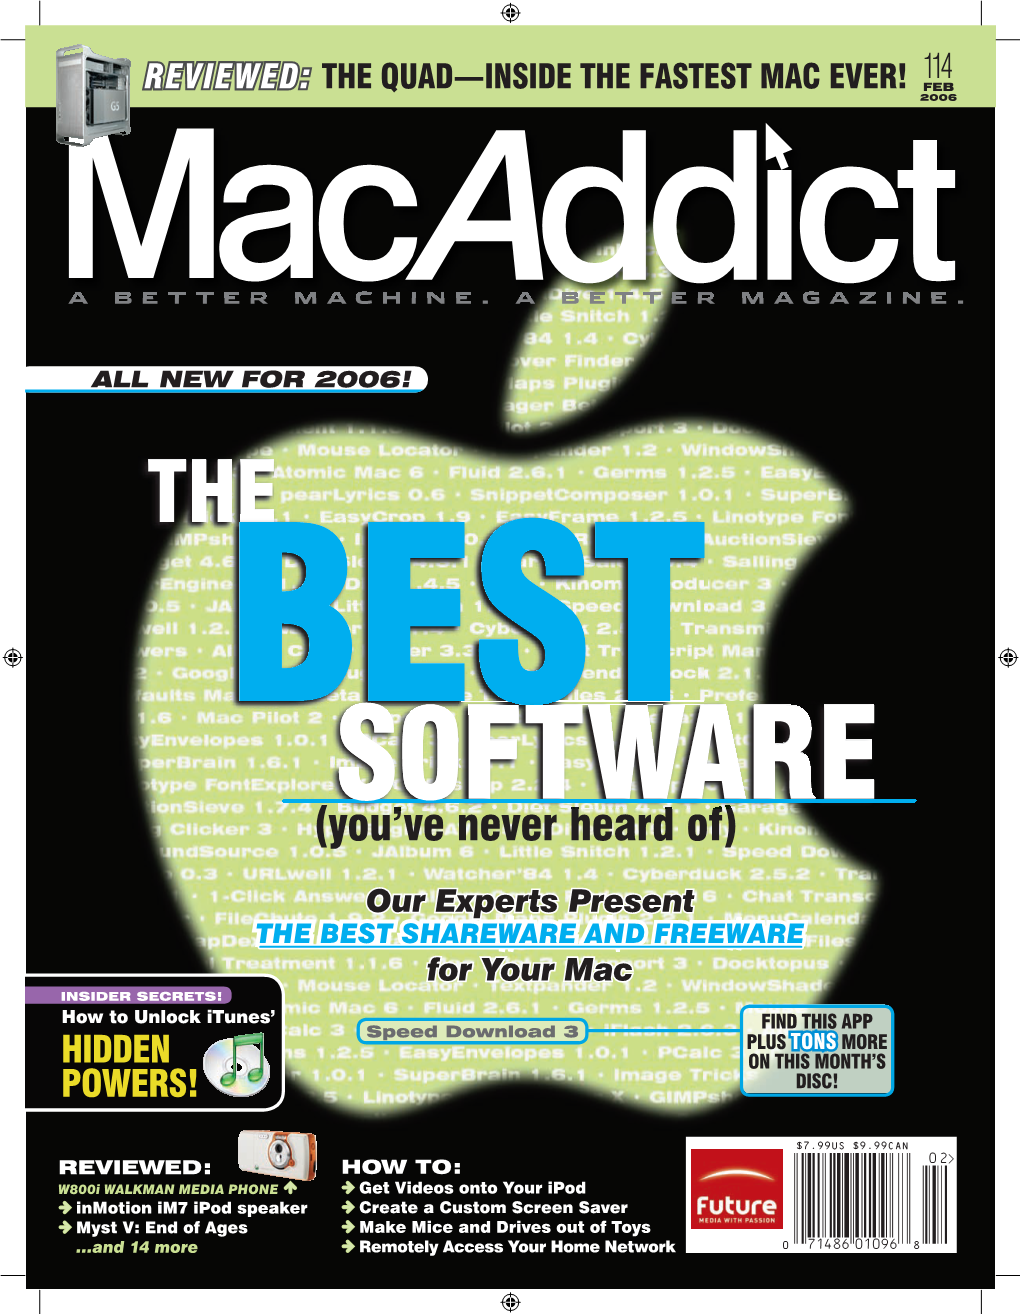 114 Reviewed: the Quad—Inside the Fastest Mac Ever! Decfeb 20052006